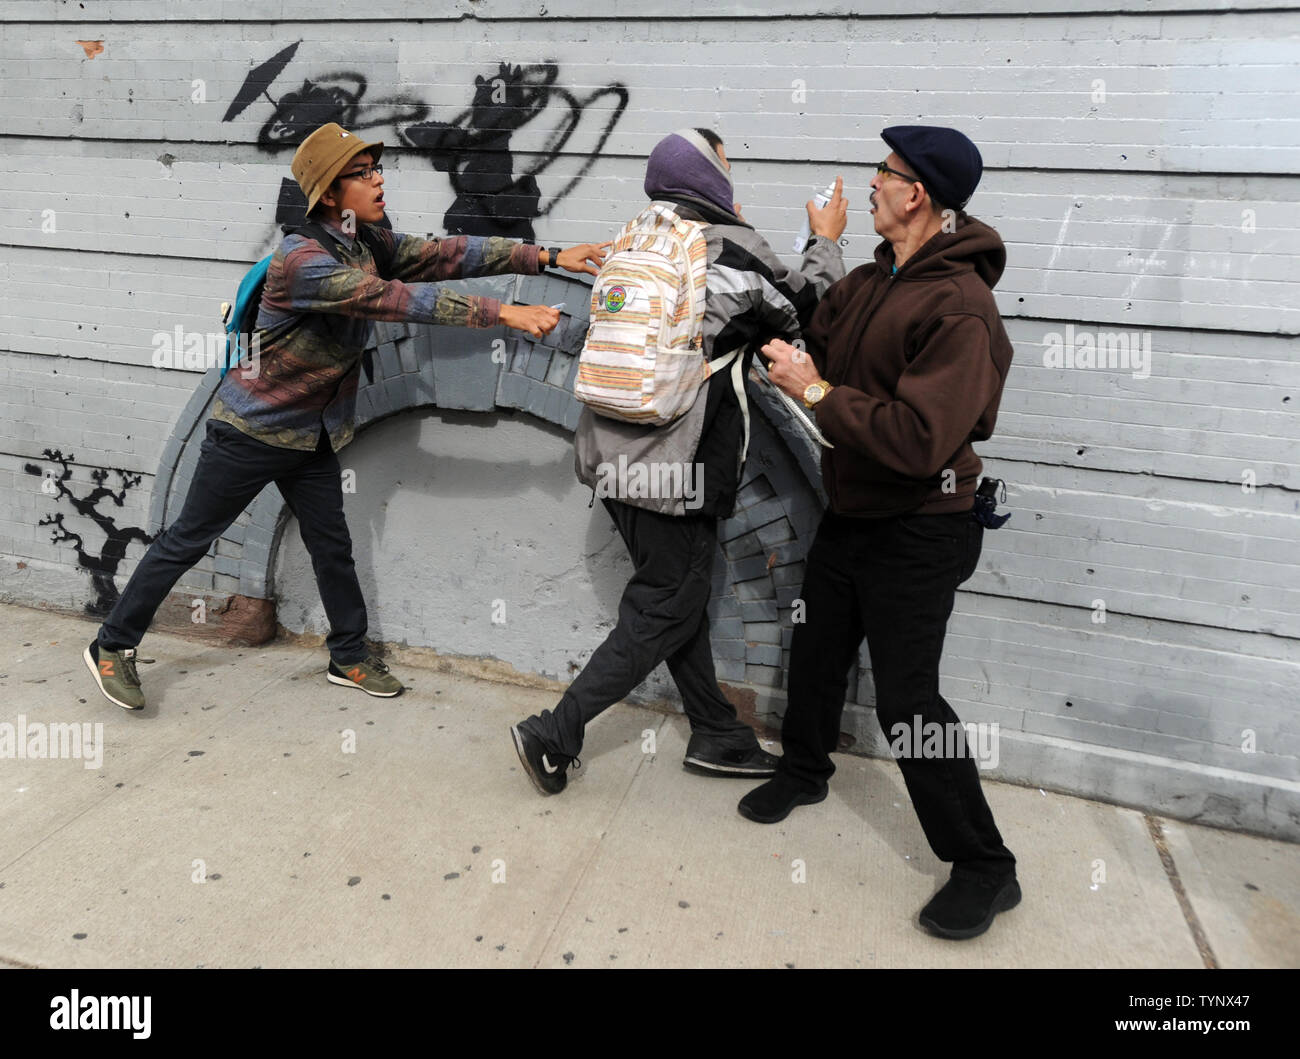 Bystanders try to stop man from spray painting over an art piece created by British street artist Banksy in Williamsburg in New York City on October 17, 2013. Banksy is a pseudonymous England-based graffiti artist, political activist, film director, and painter. His satirical street art and subversive epigrams combine dark humor with graffiti done in a distinctive stenciling technique.    UPI/Dennis Van Tine Stock Photo